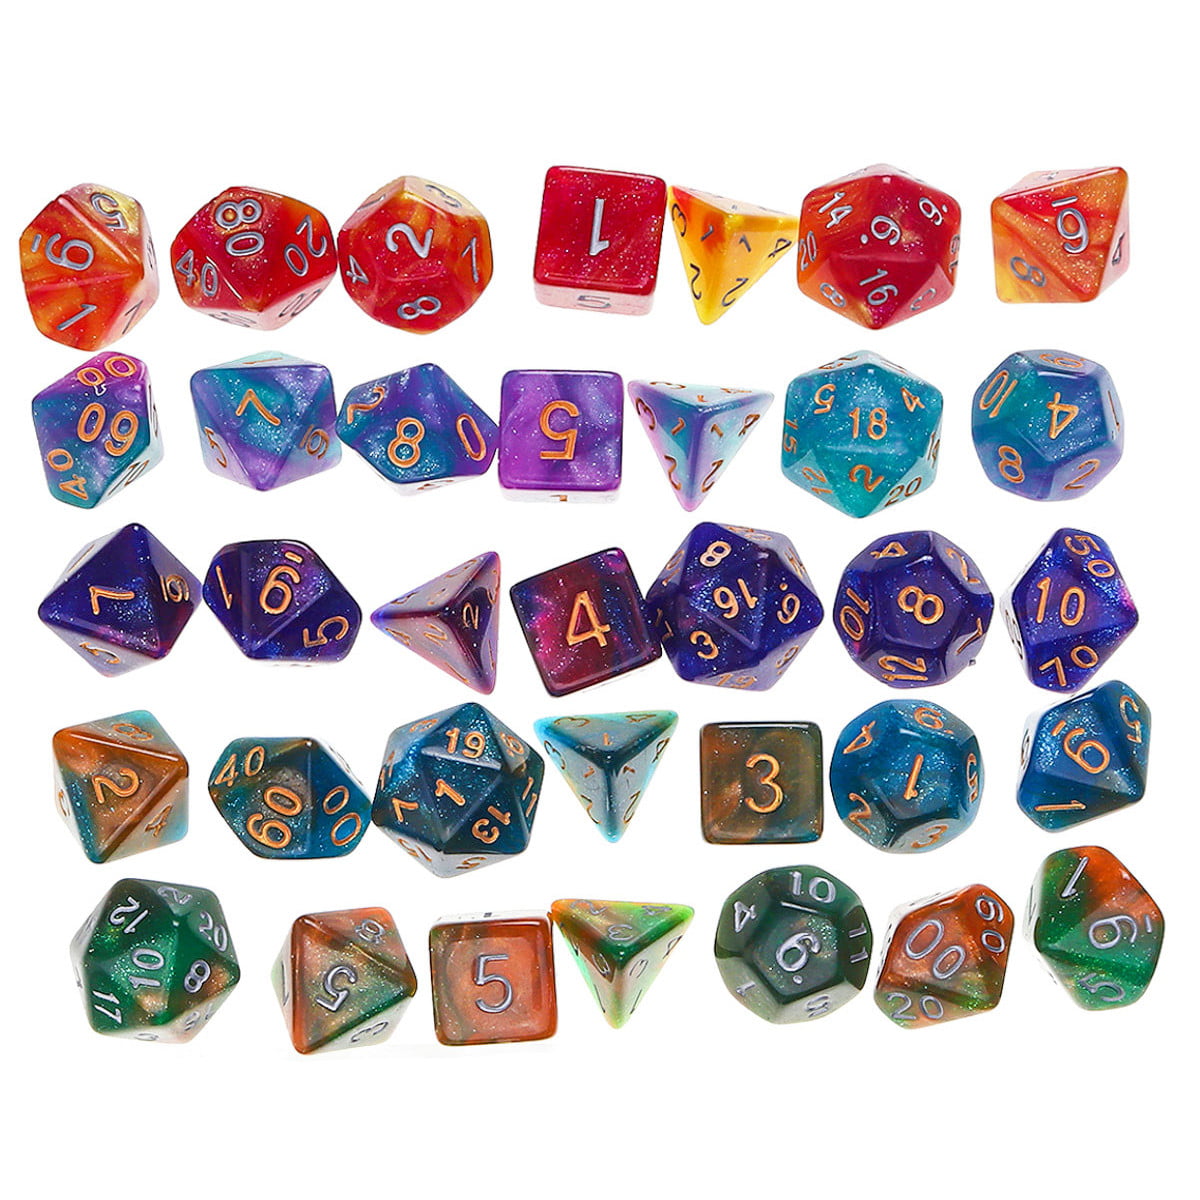 7pcs/Set Polyhedral Dice for DND RPG MTG Game Dungeons & Dragons D4-D20 Colors 